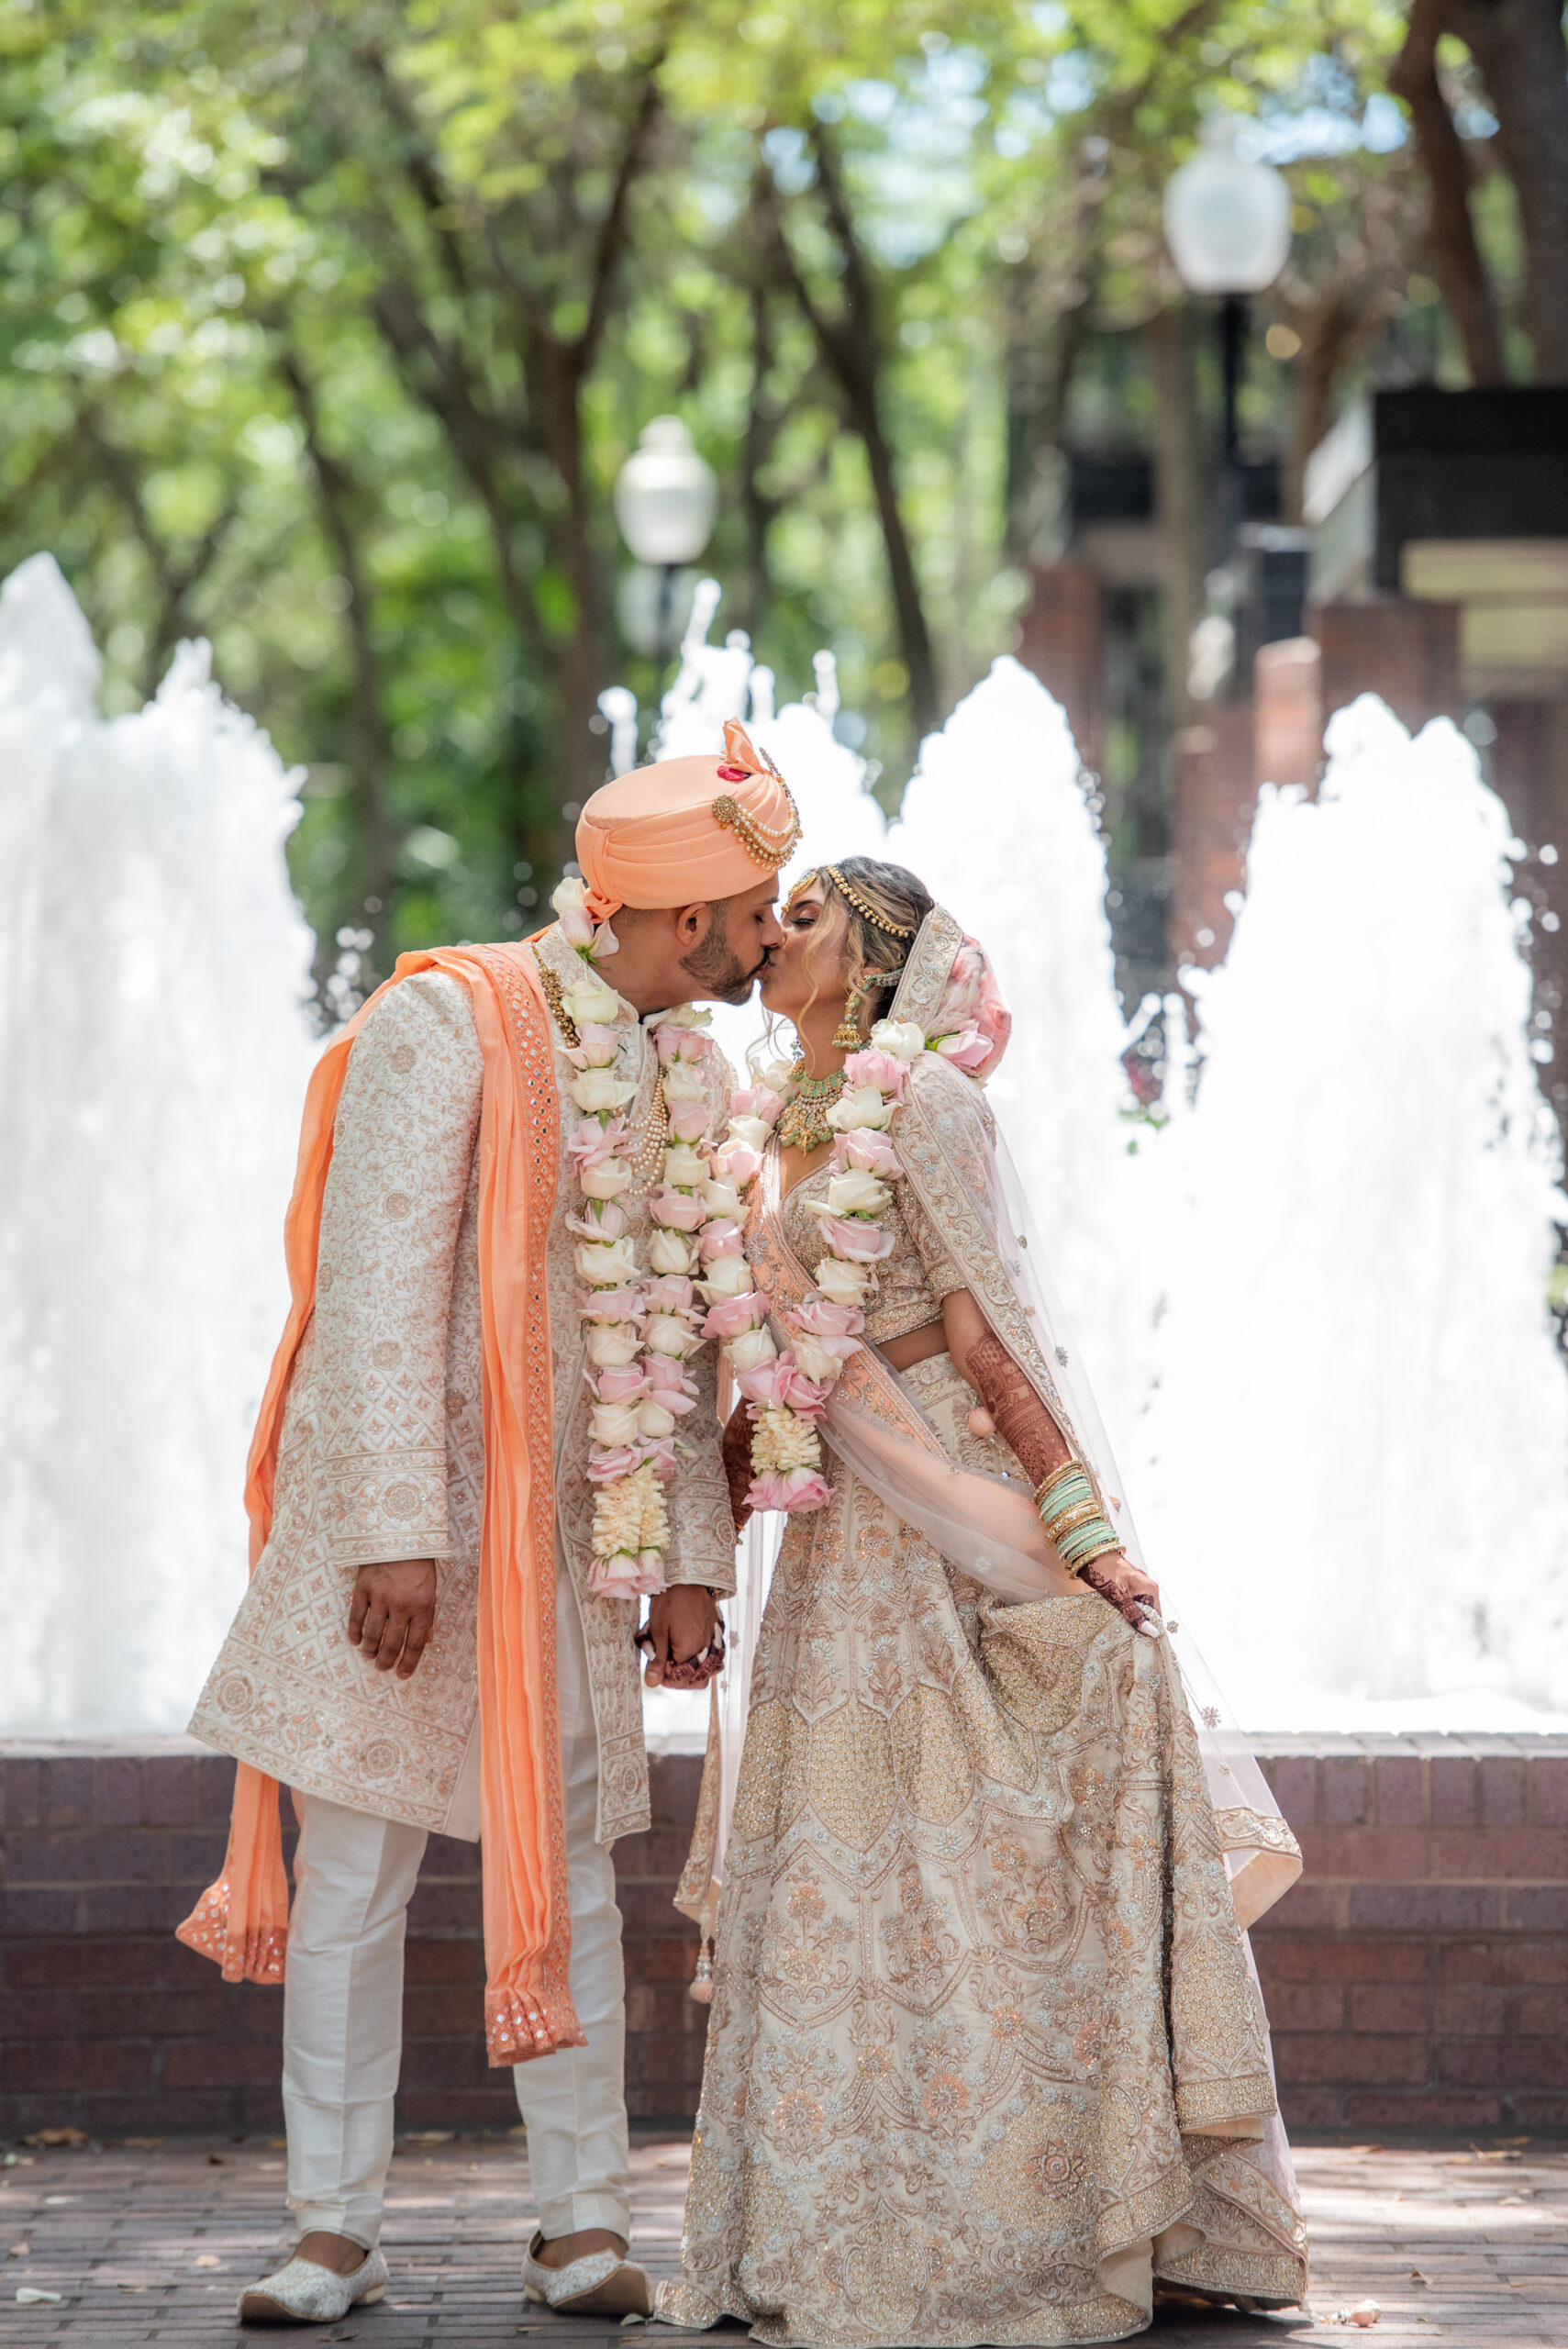 Florida Bride and Groom Kissing, Wearing Traditional Indian Wedding Mala, Ivory and Pink rose flower garland, Rose Gold and White Saree, Coral Peach Turban | Tampa Bay Wedding Venue Hilton Downtown Tampa